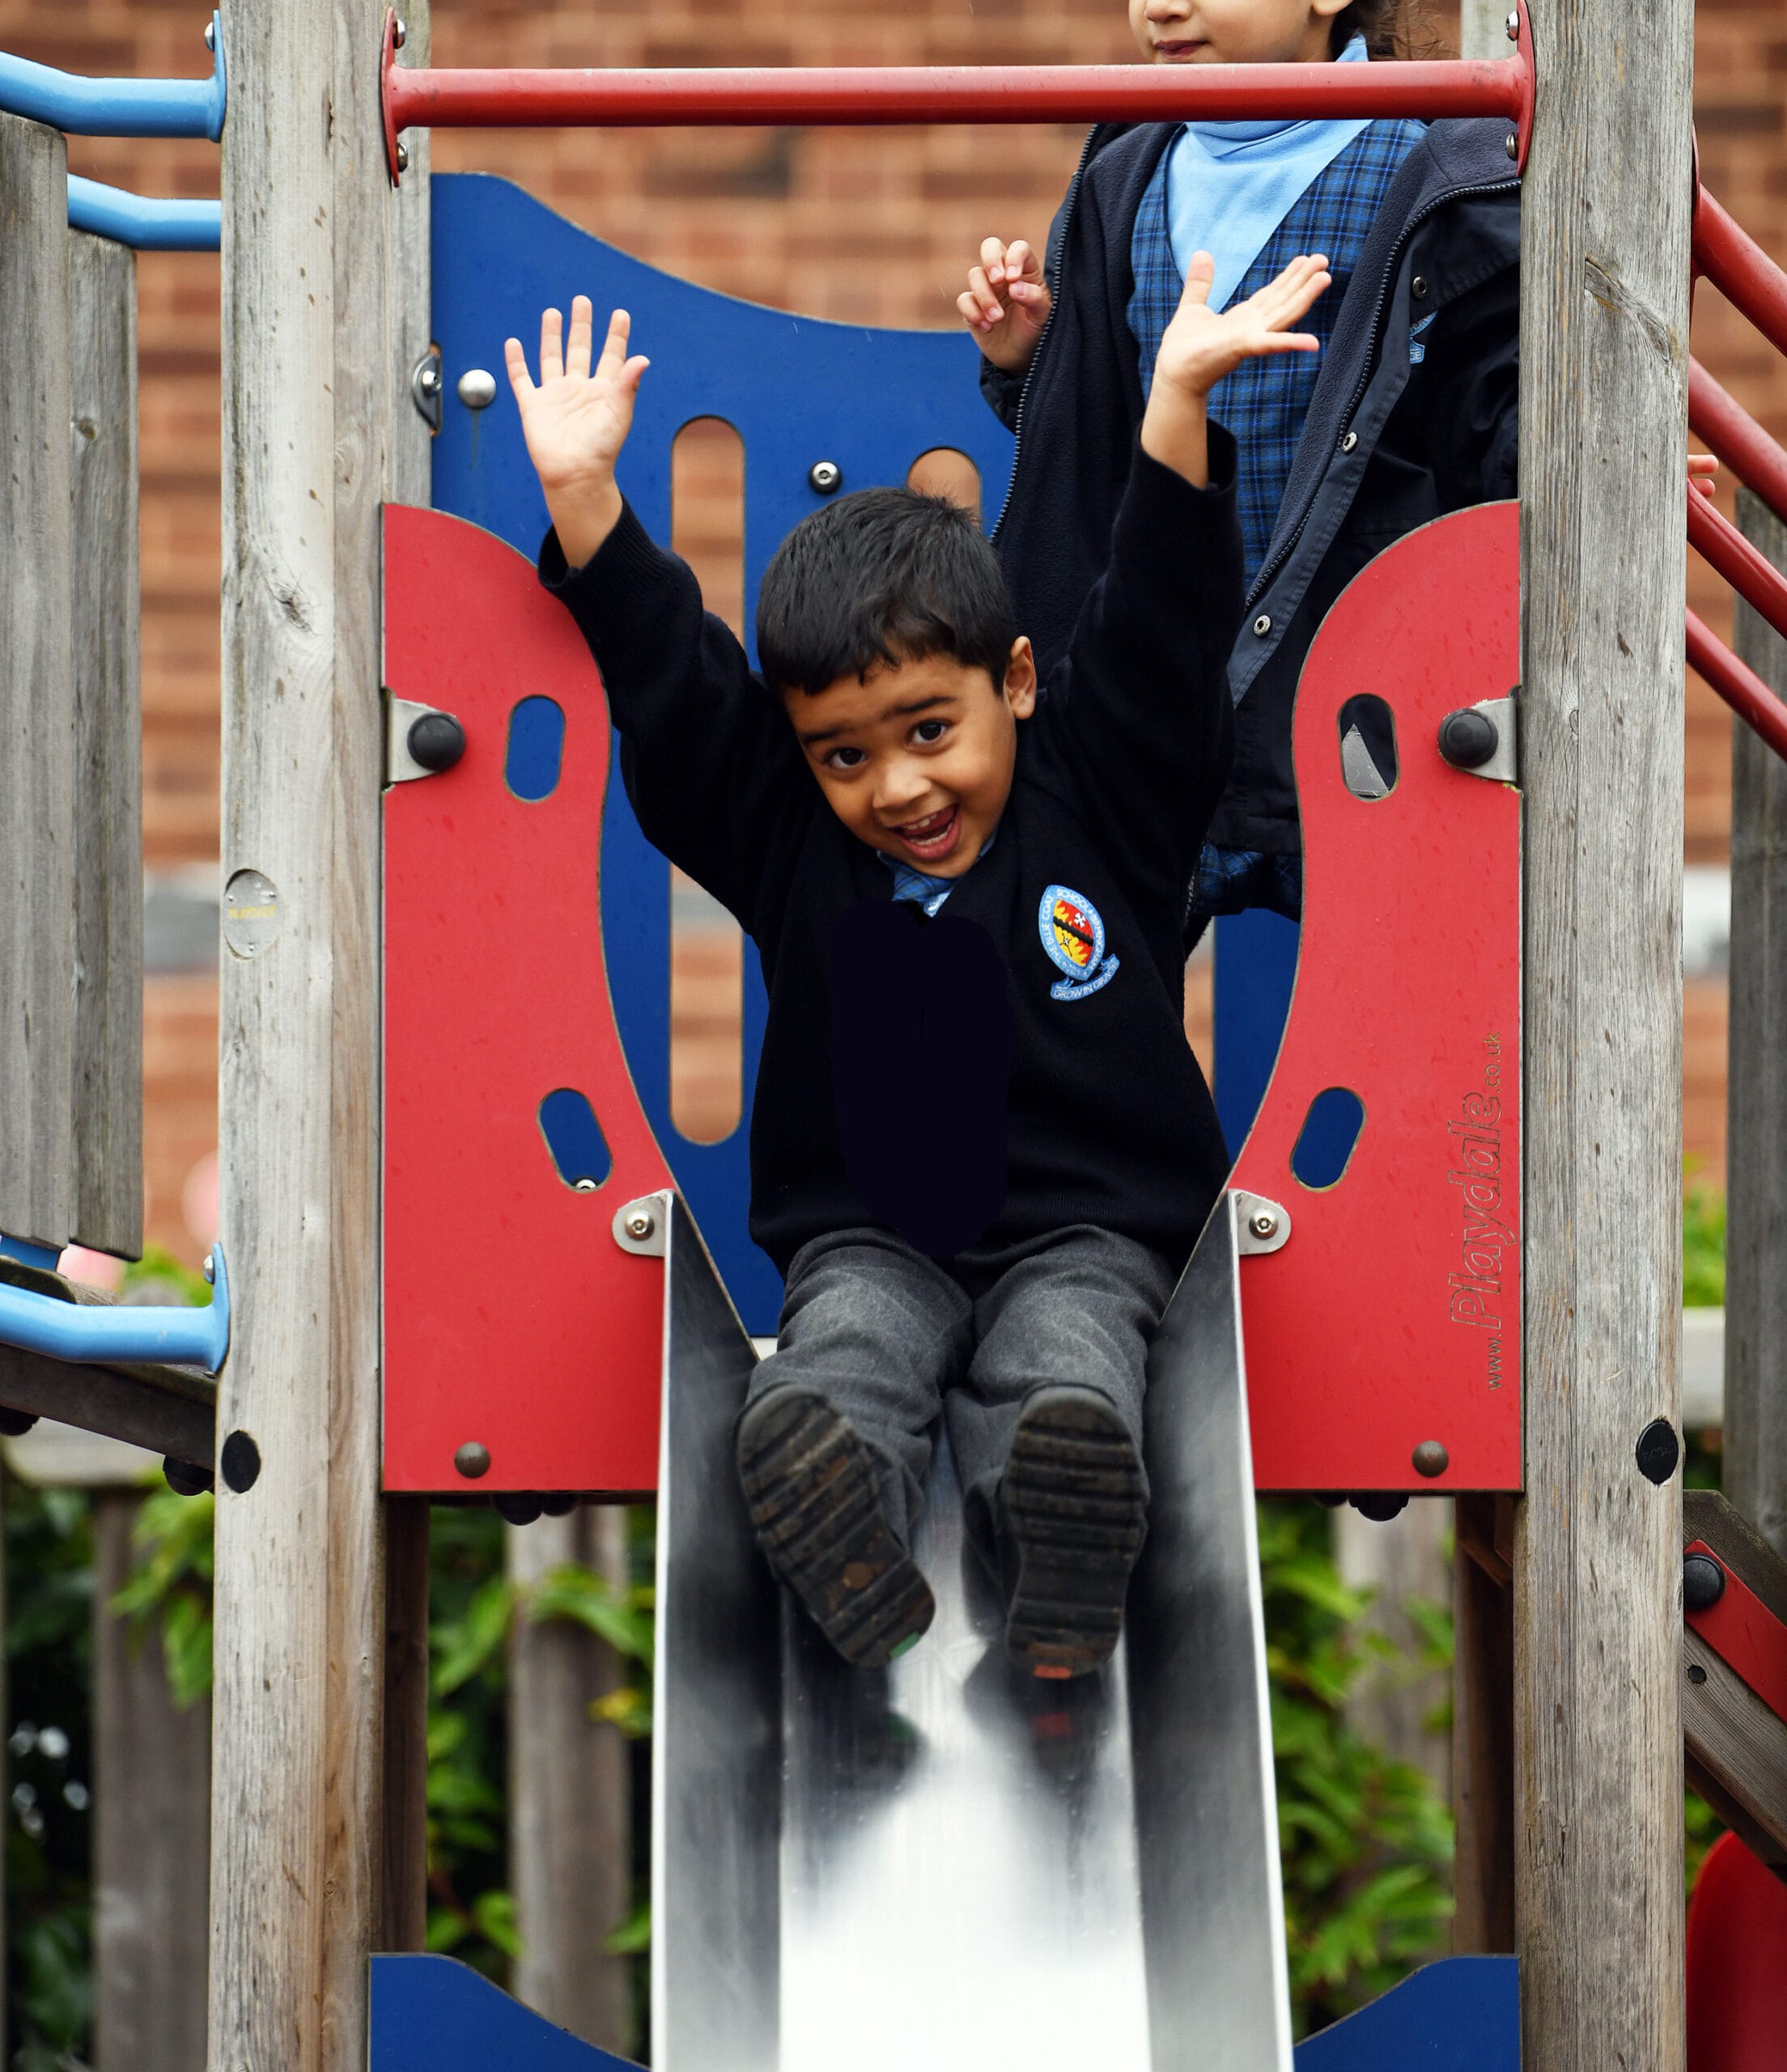 A boy slides down the slide in the Nursery playground with his arms in the air.